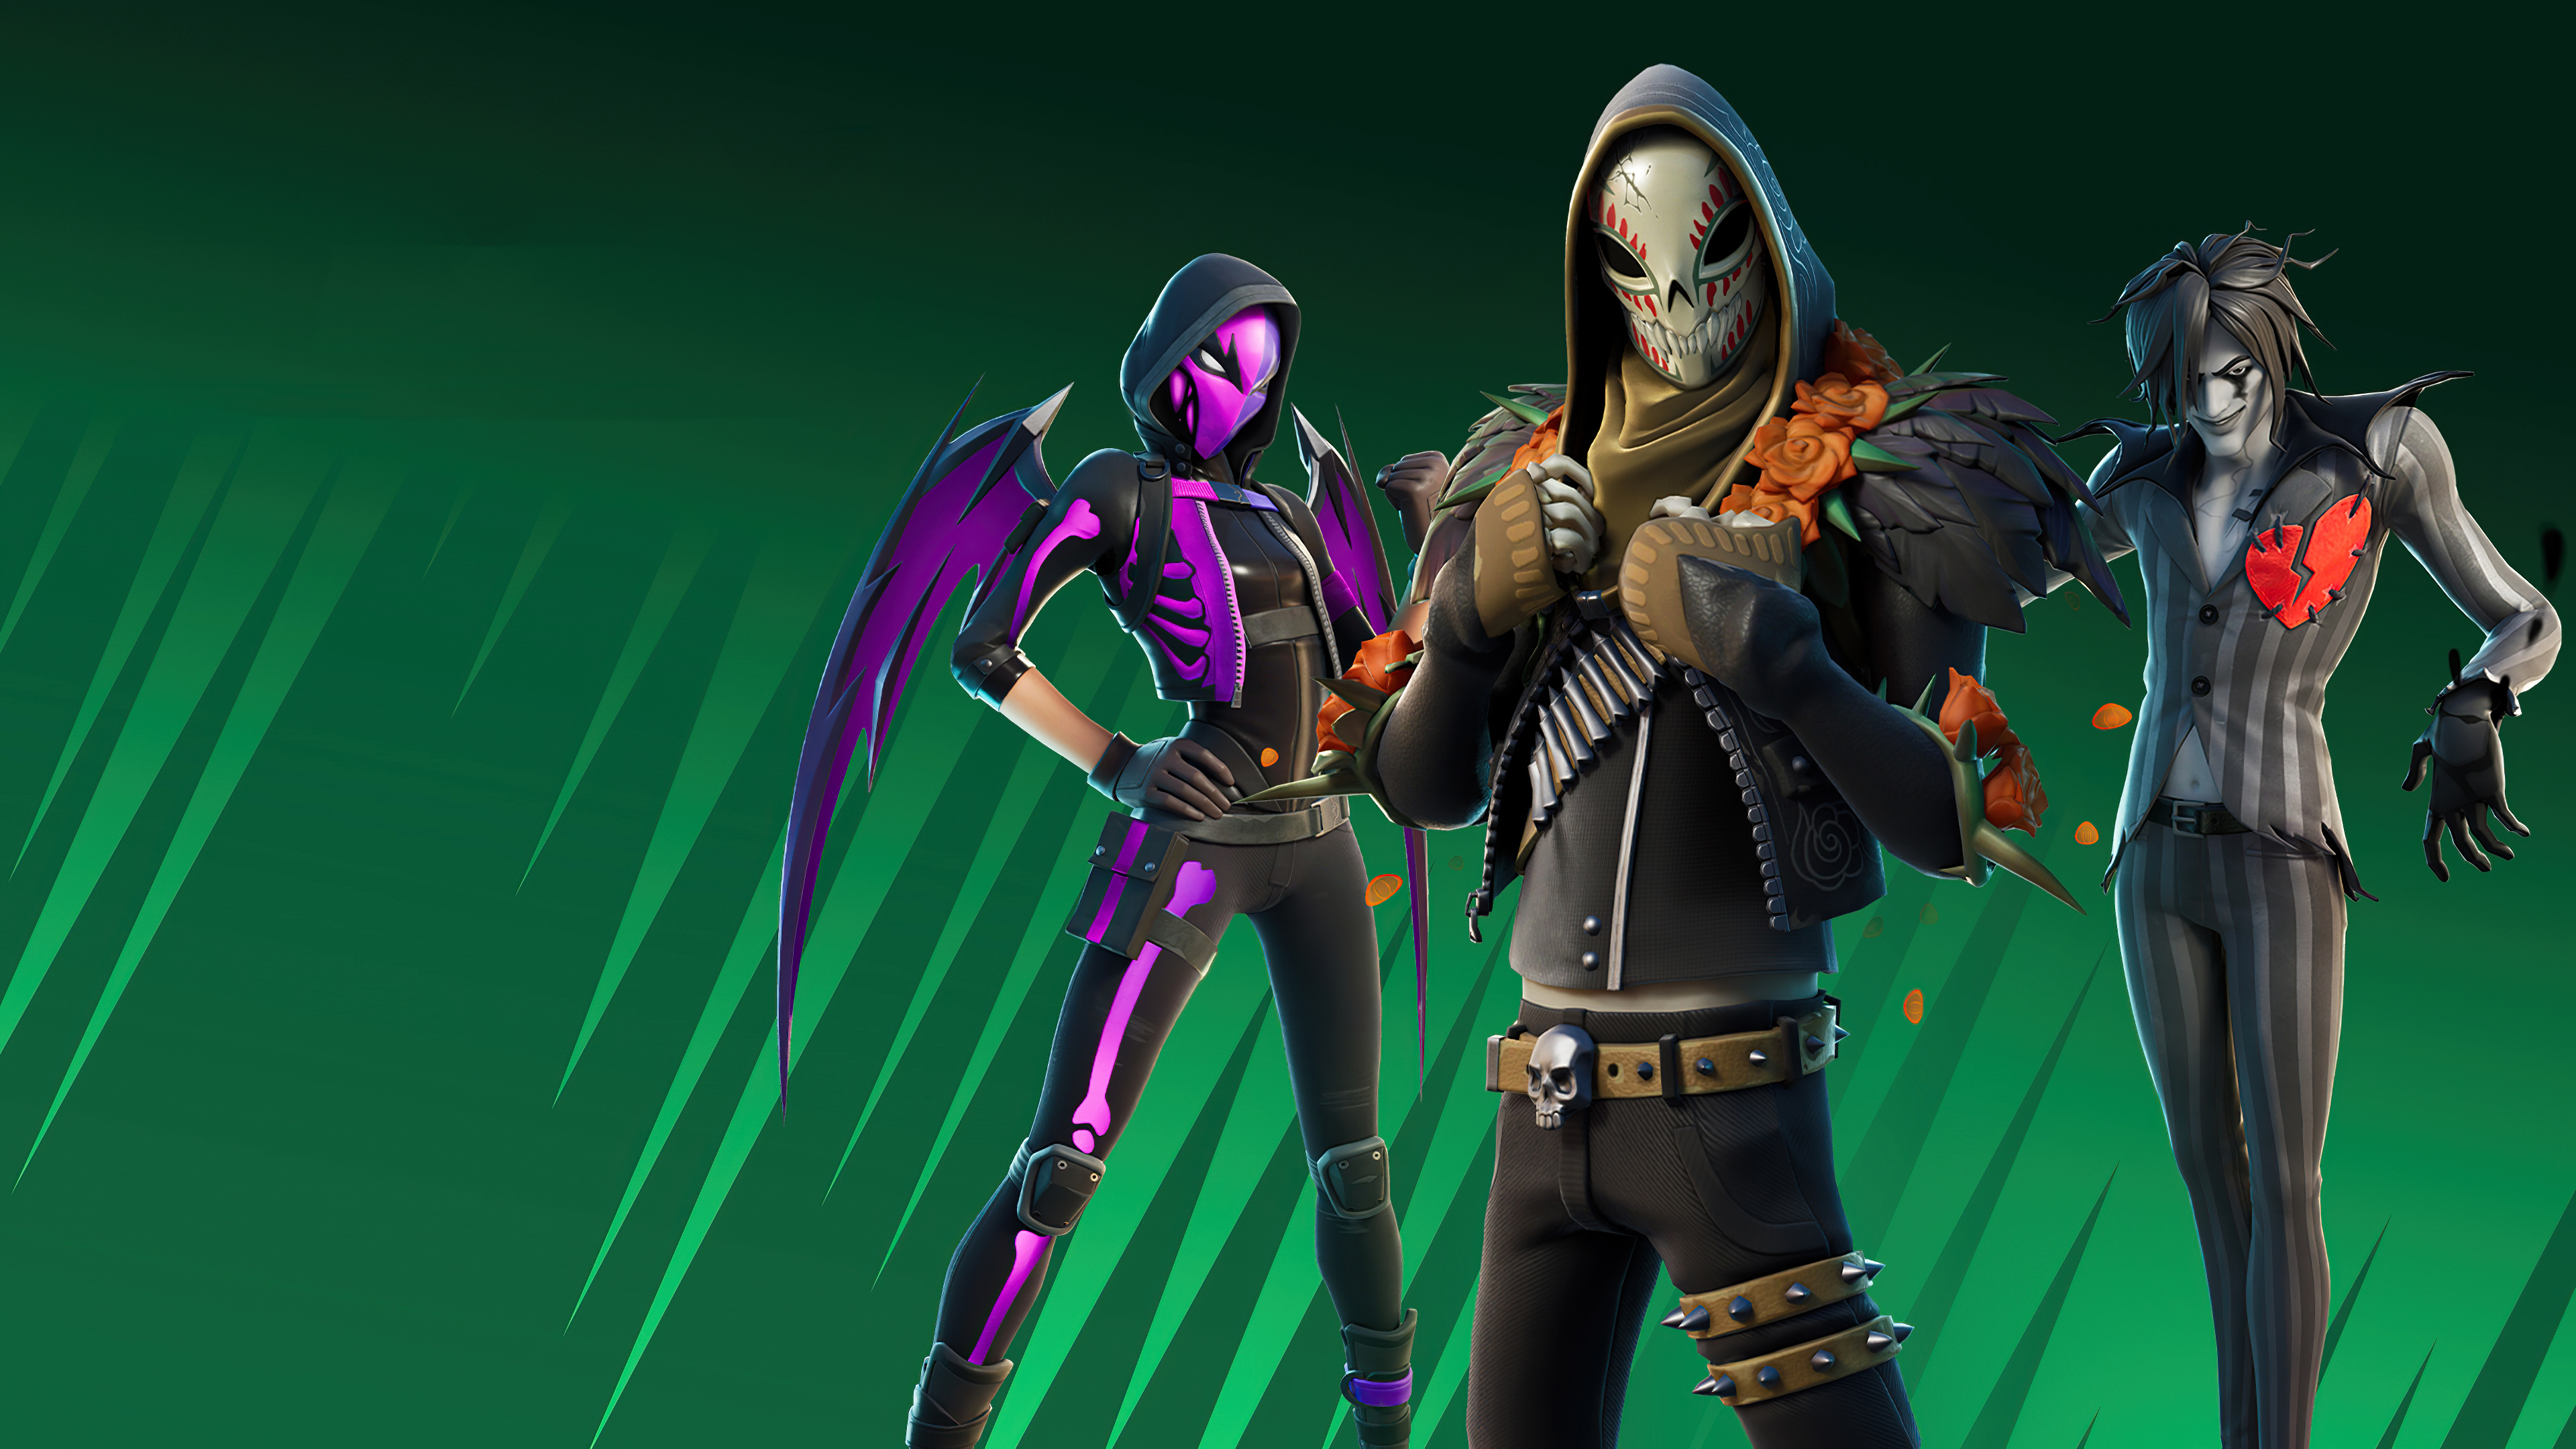 The screensaver from the game Fortnite